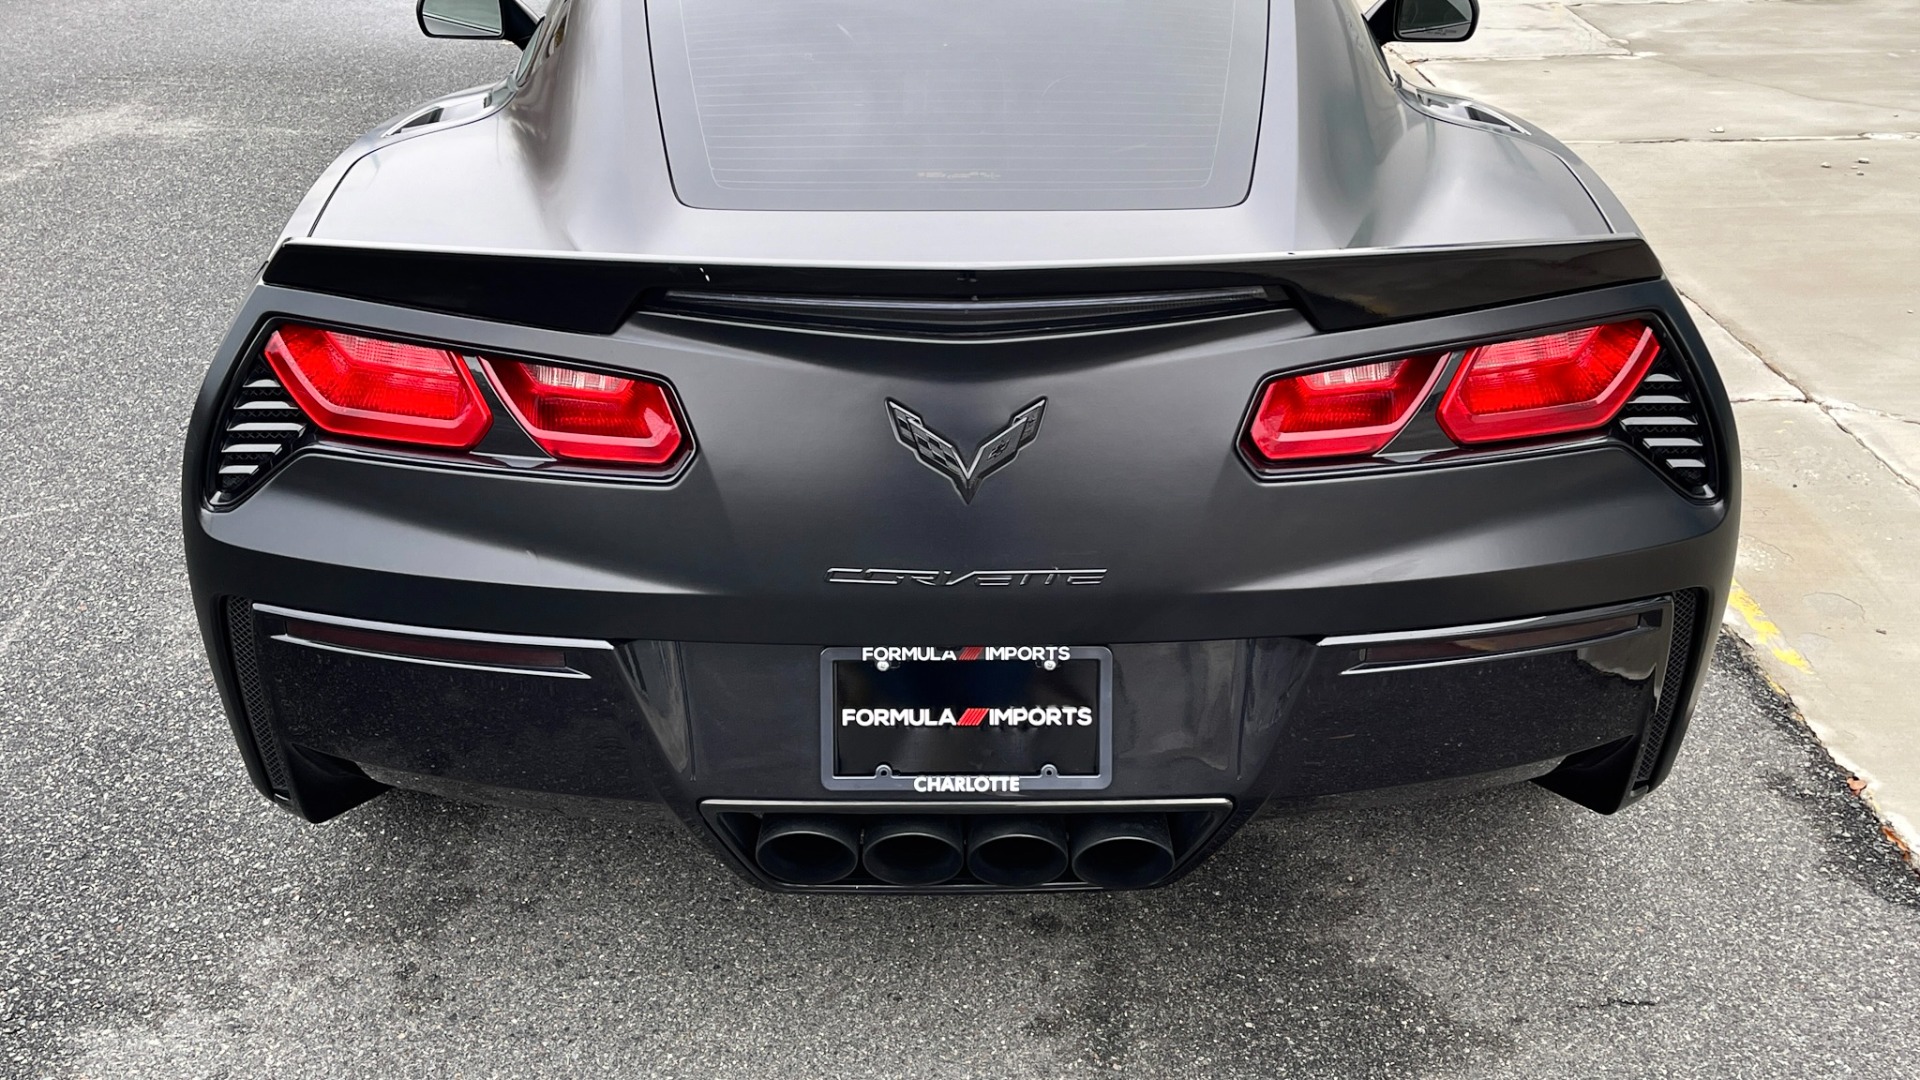 Used 2016 Chevrolet Corvette Z51 2LT / MATTE BLACK / CORSA EXHAUST / COMPETITION SEATS / PERFORMANCE for sale Sold at Formula Imports in Charlotte NC 28227 9